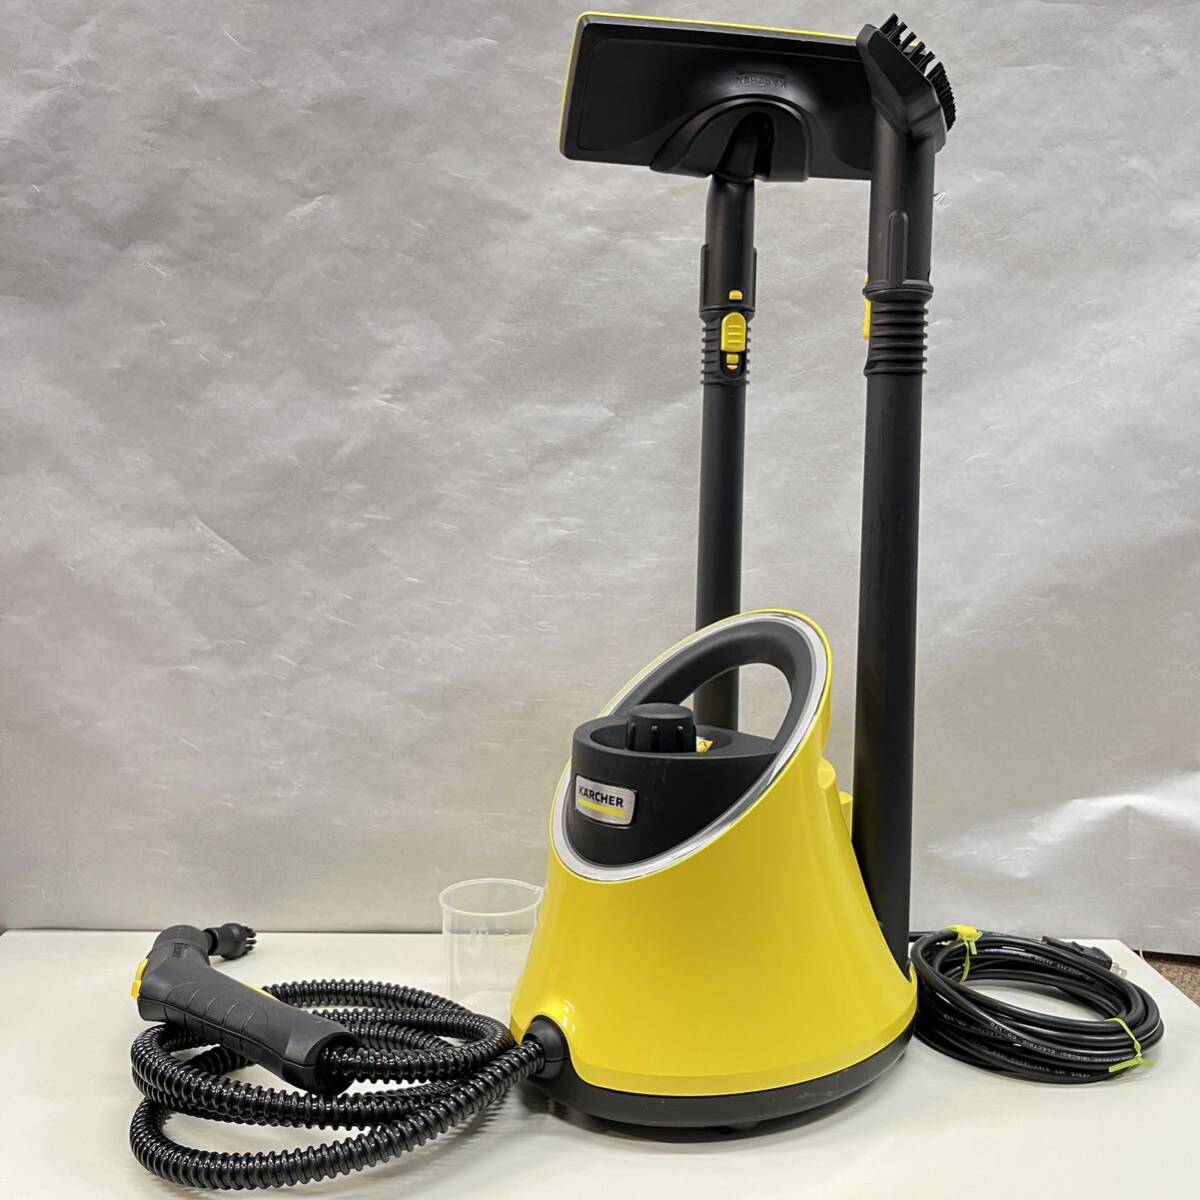  Karcher steam cleaner cleaning yellow SC JTK 20 2018 year made operation verification ending (05066 average )